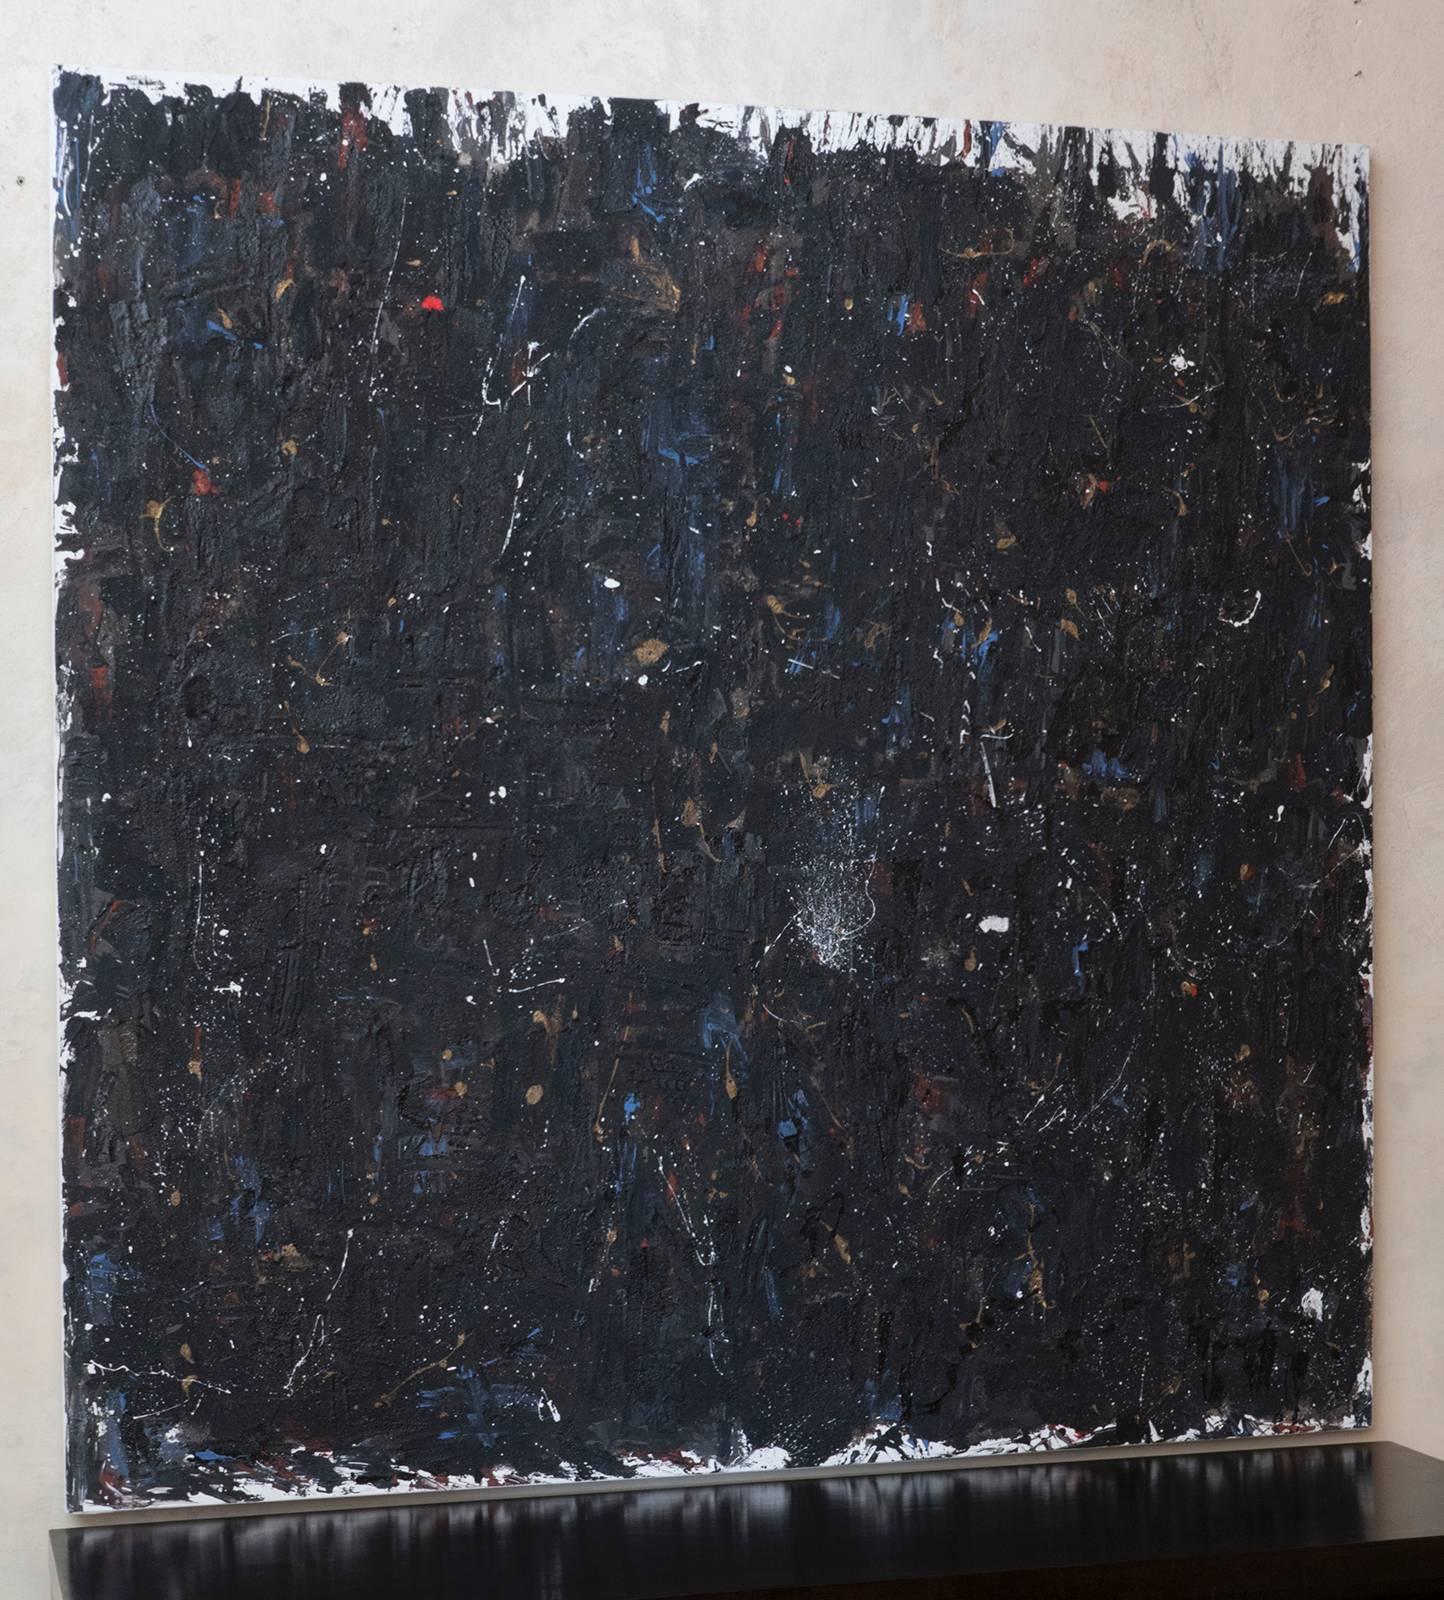 Abstract materic painting on canvas over wood panel, sand, plaster and acrylic by Andrea Brandi, 2014.